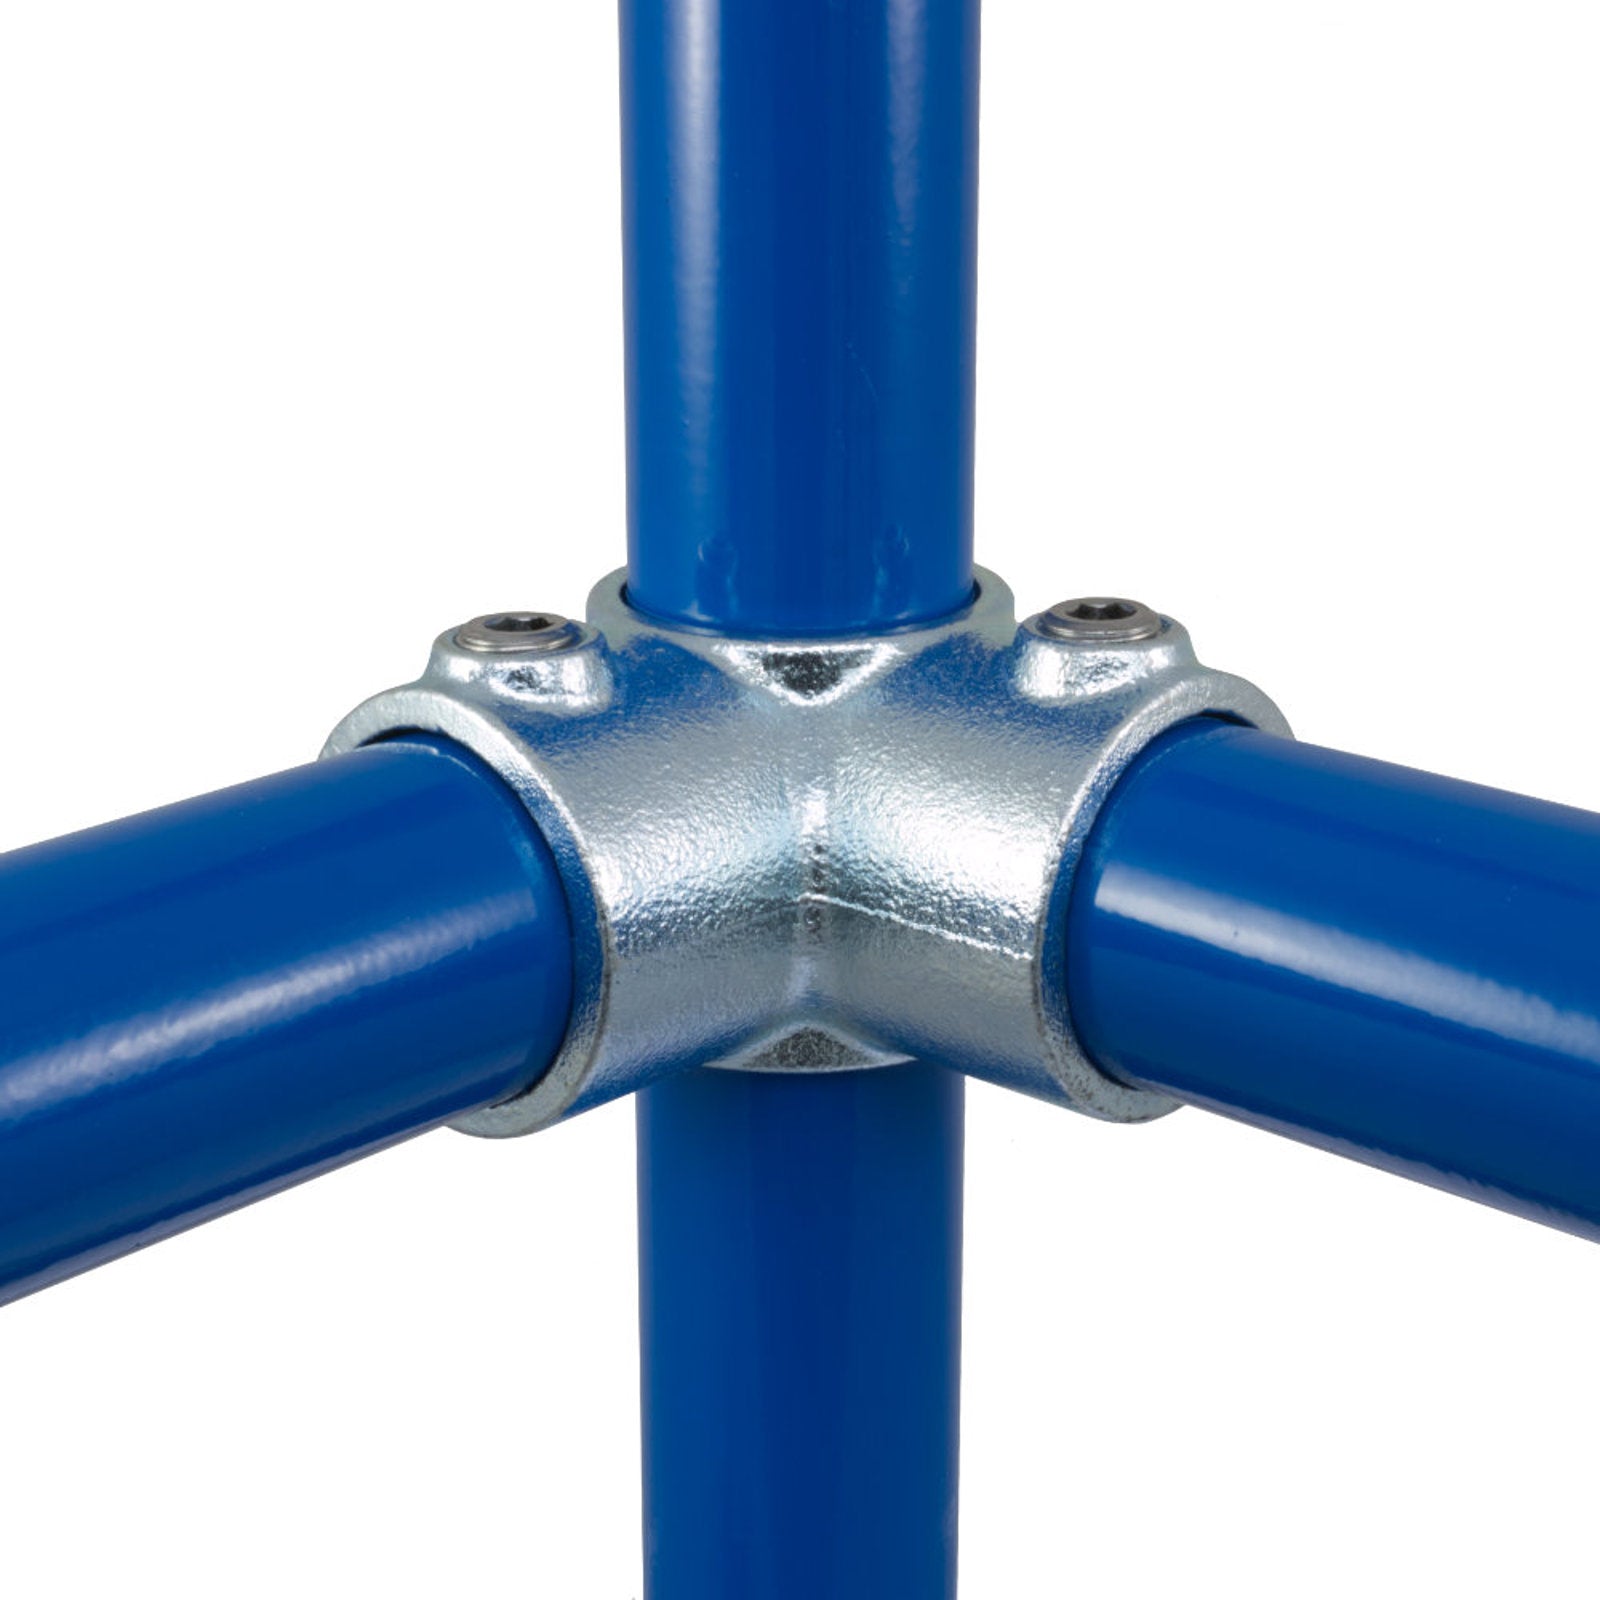 Three Way Through or 90 Degree Corner Centre T by Interclamp Code 116. Shop rail, pipe and fence fittings online at chain.com.au. Australia wide shipping.